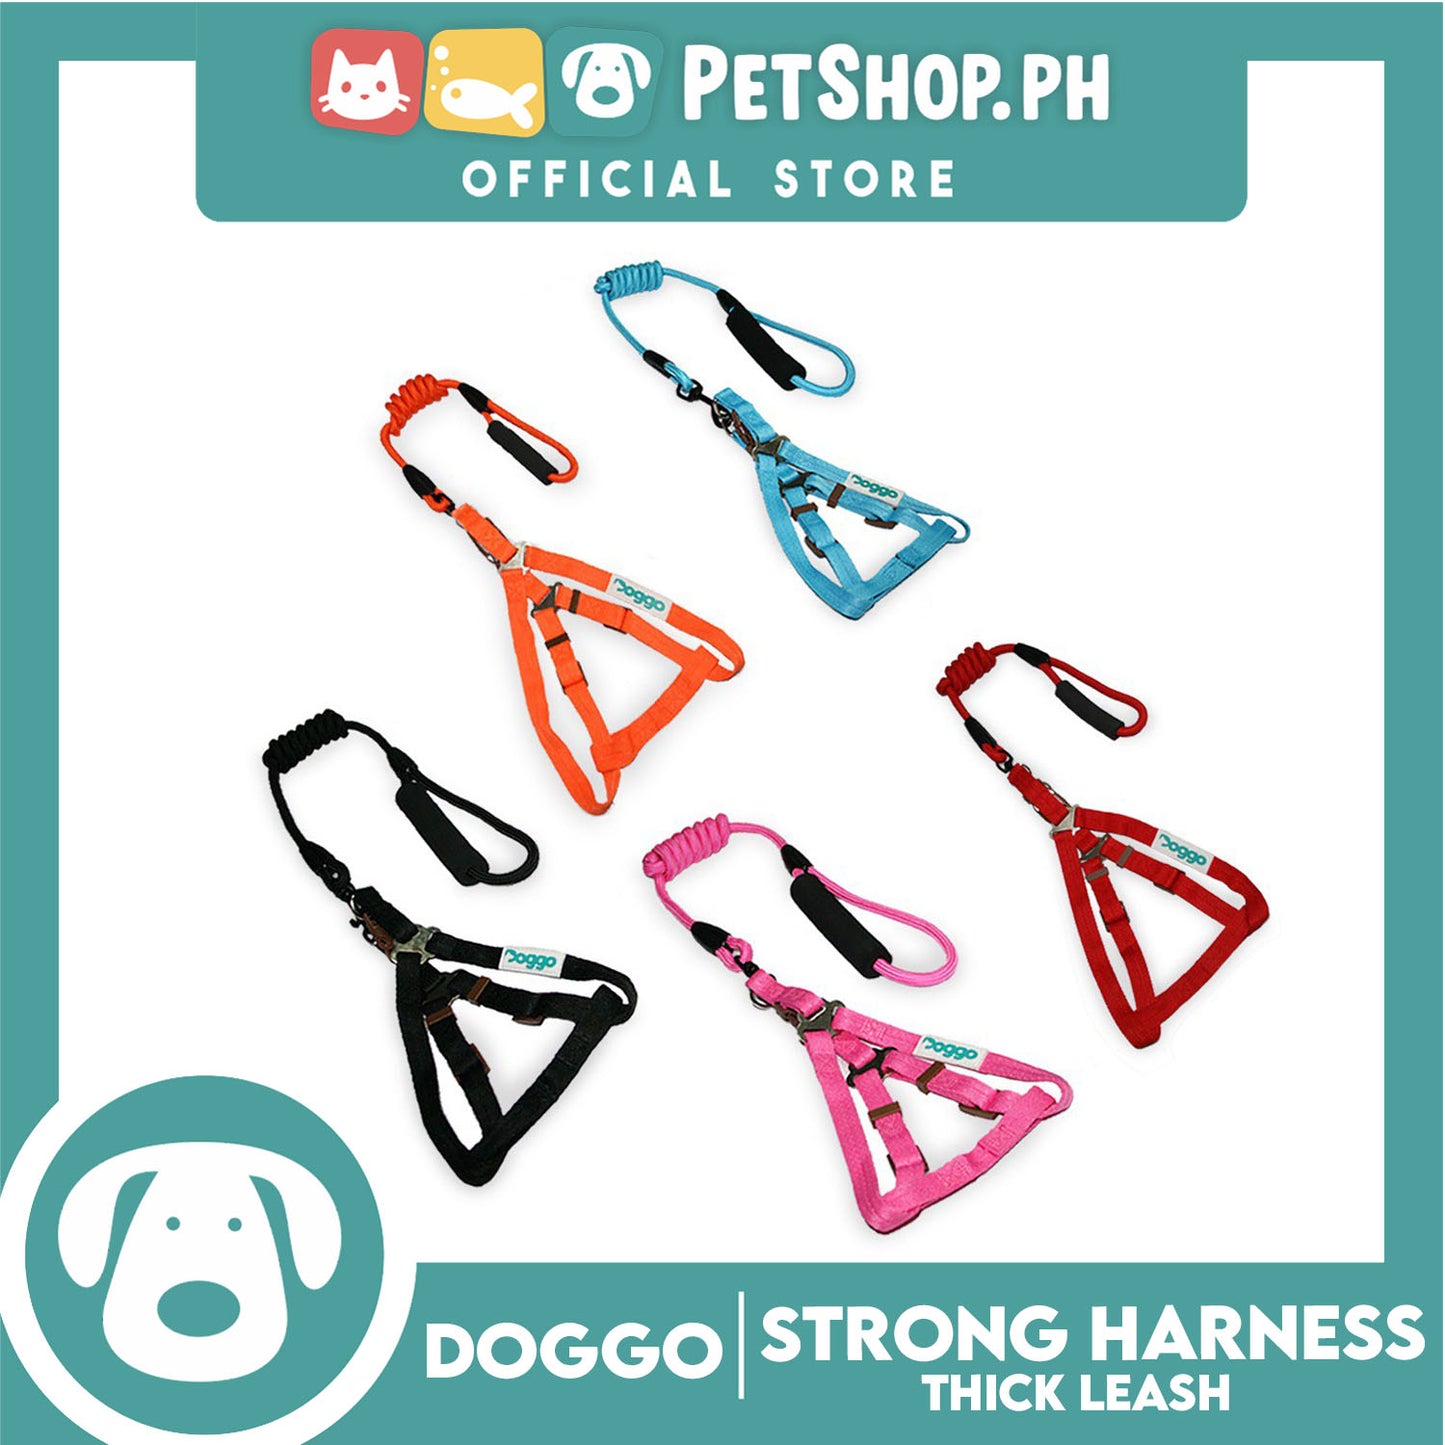 Doggo Denim Strong Harness Small (Black) Thick Leash and Straps for Your Dog